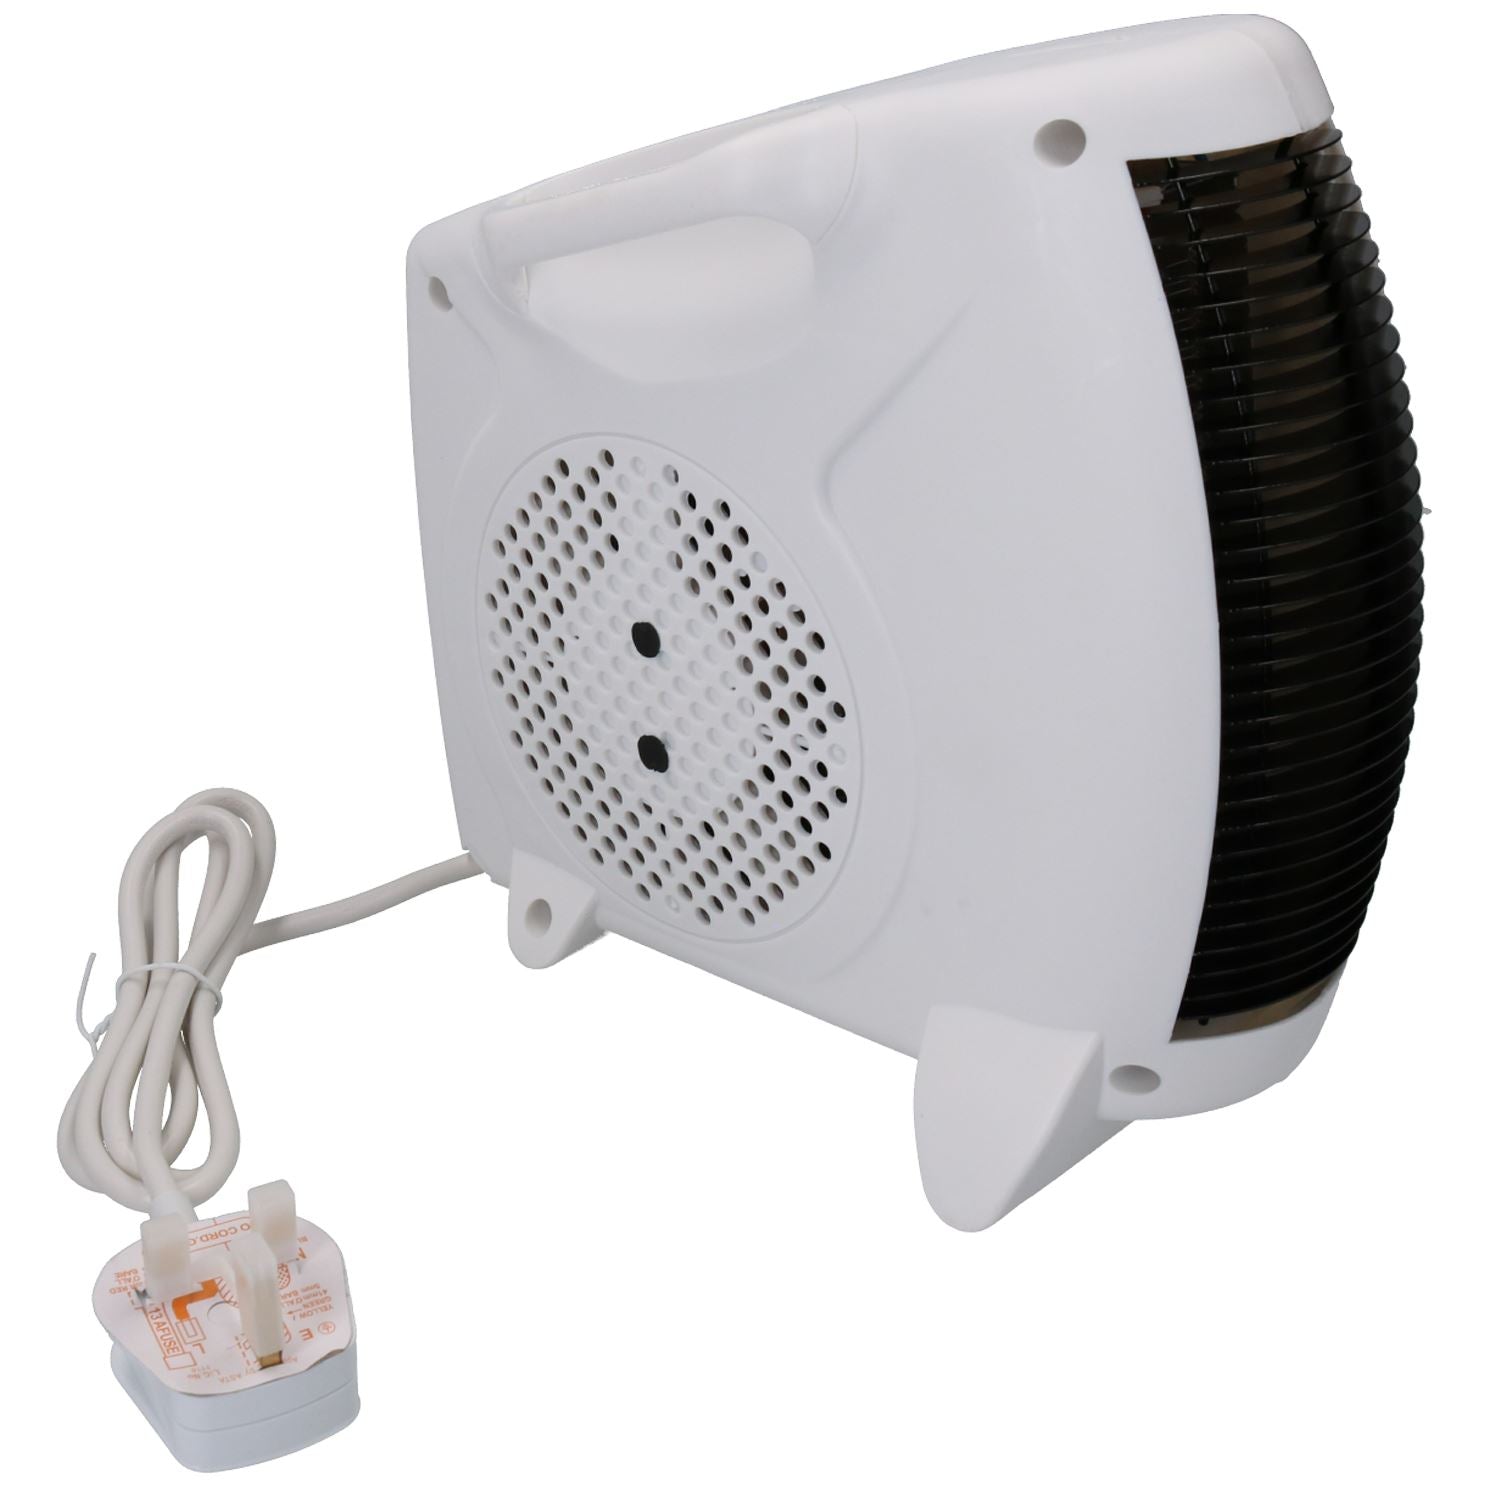 2KW Electric Upright or Flat Blow Fan Heater 2 Heat Settings Hot Or Cold Air